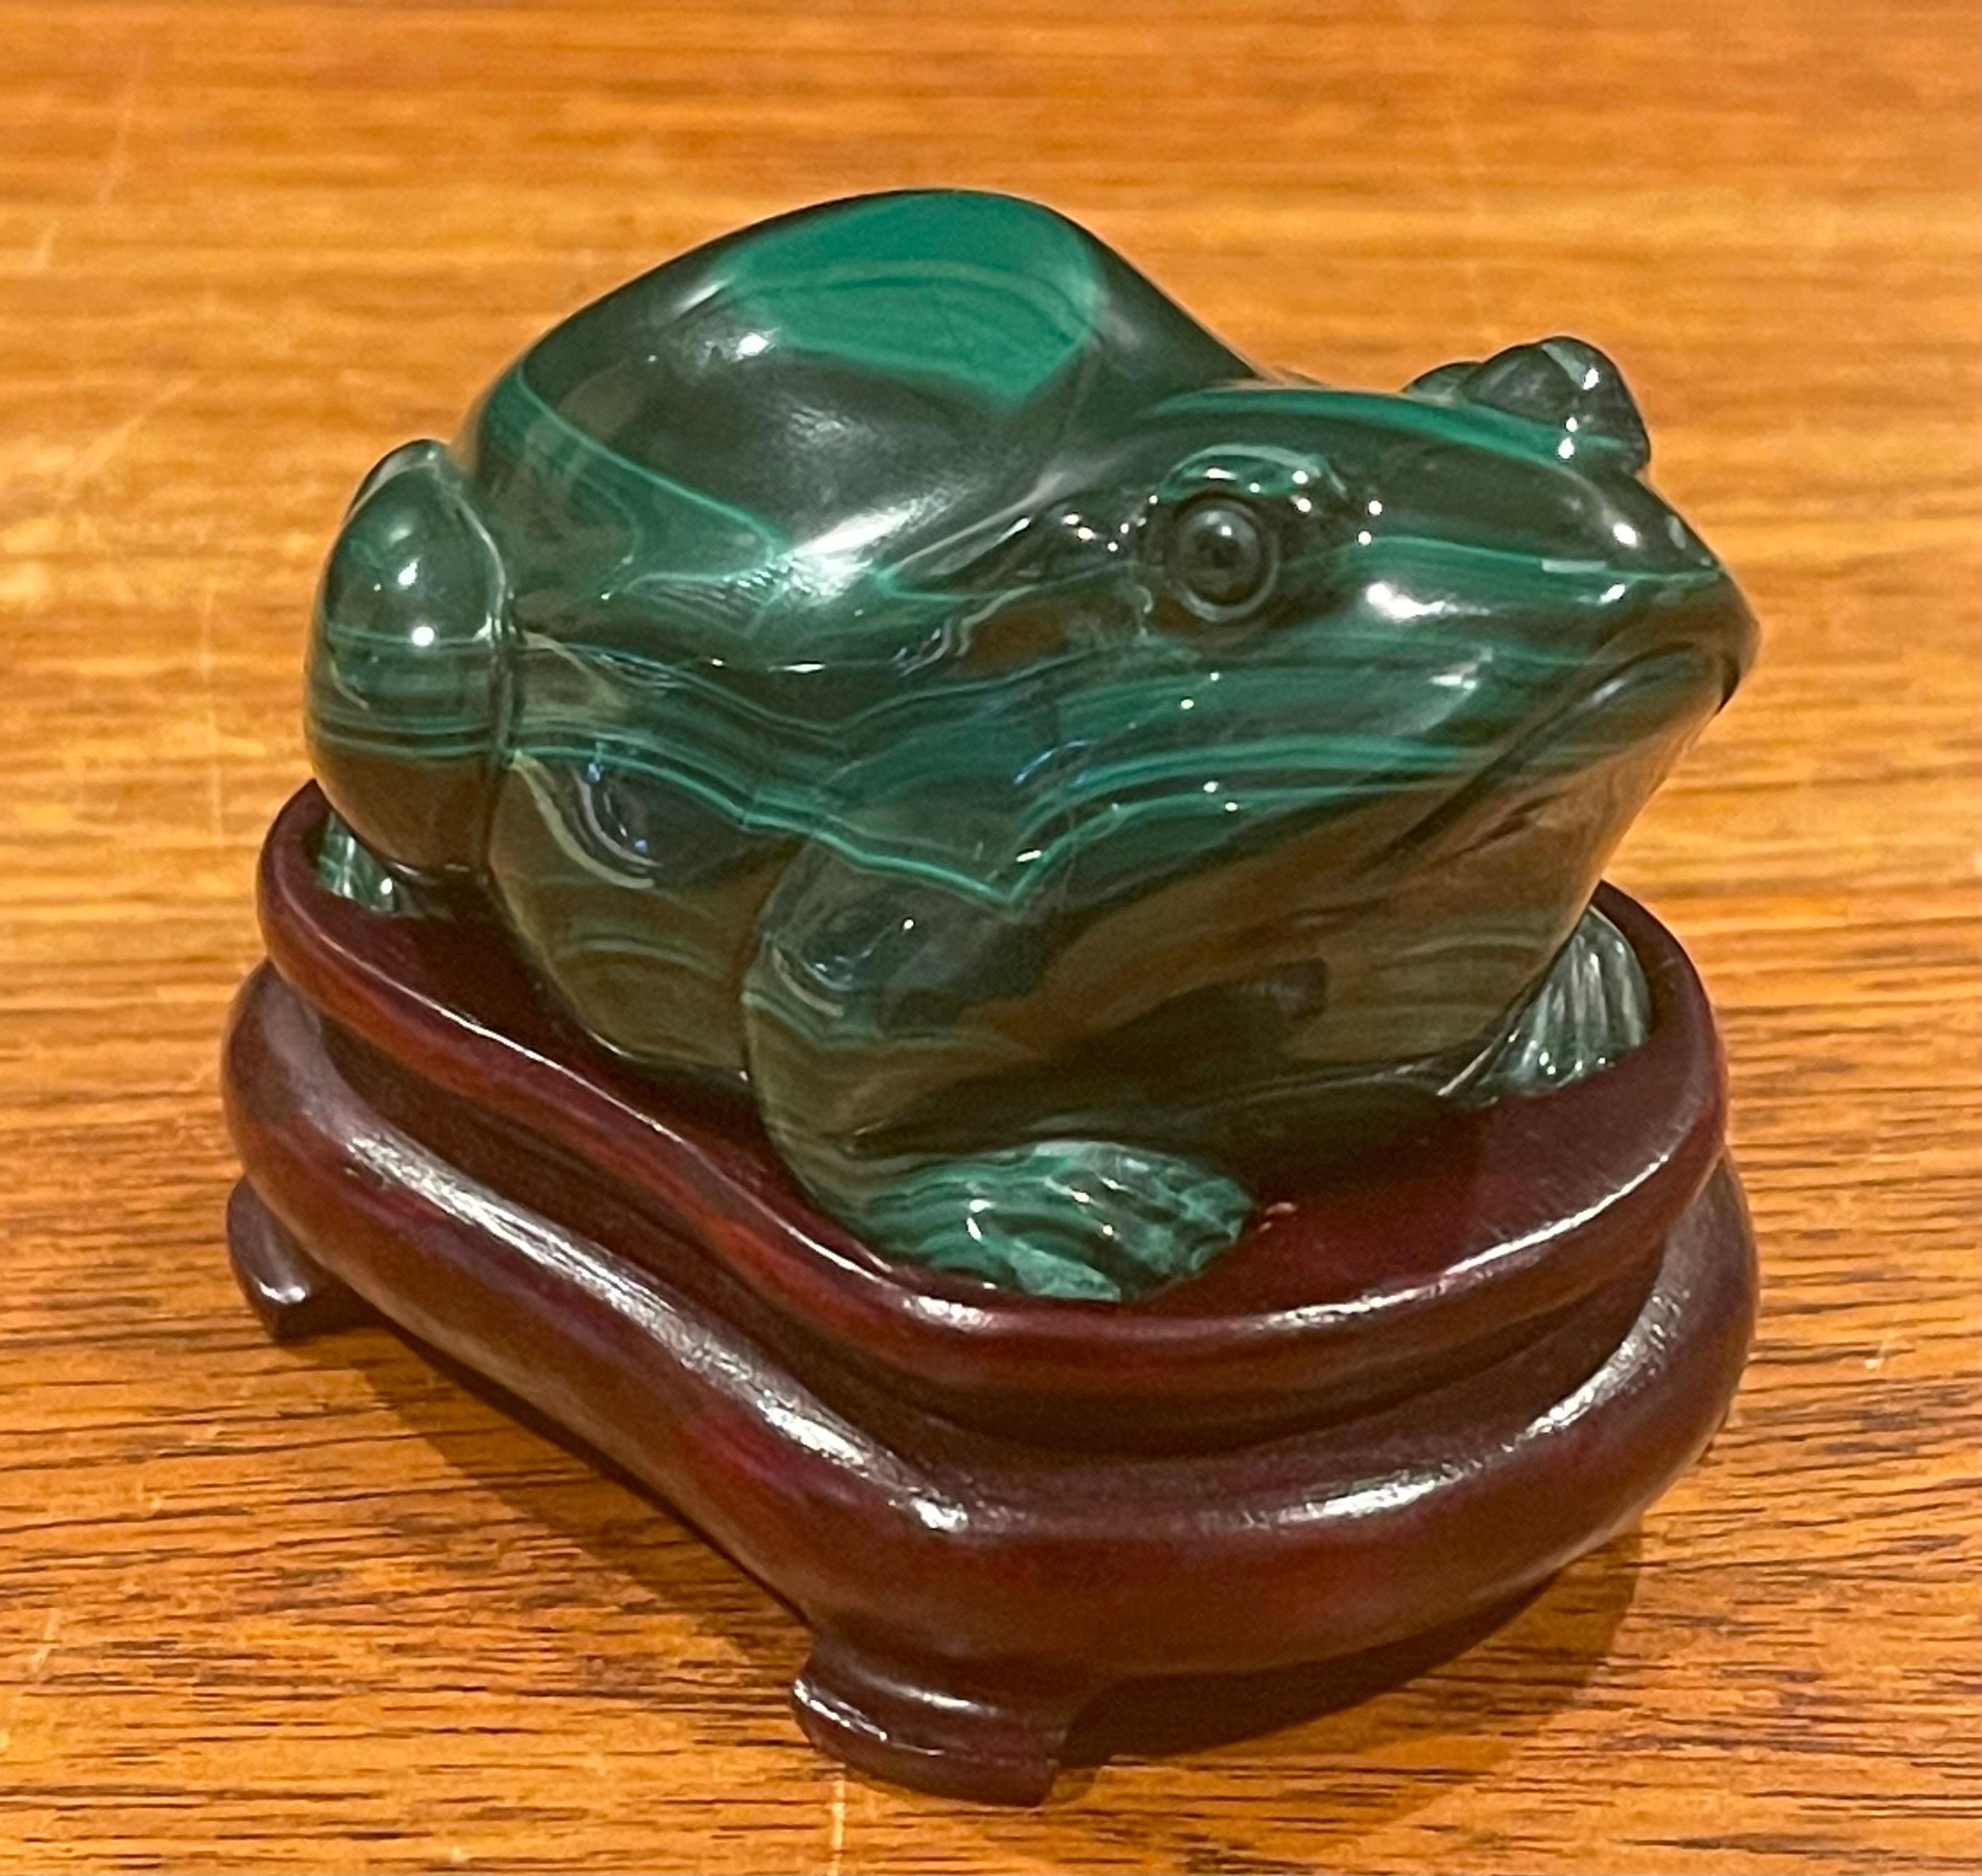 A very cool hand carved malachite frog / toad sculpture on fitted hardwood base, circa 1970s. The piece is a superb example of traditional Chinese hardstone figural carving; it is very well detailed and highly polshed. The frog is in very good